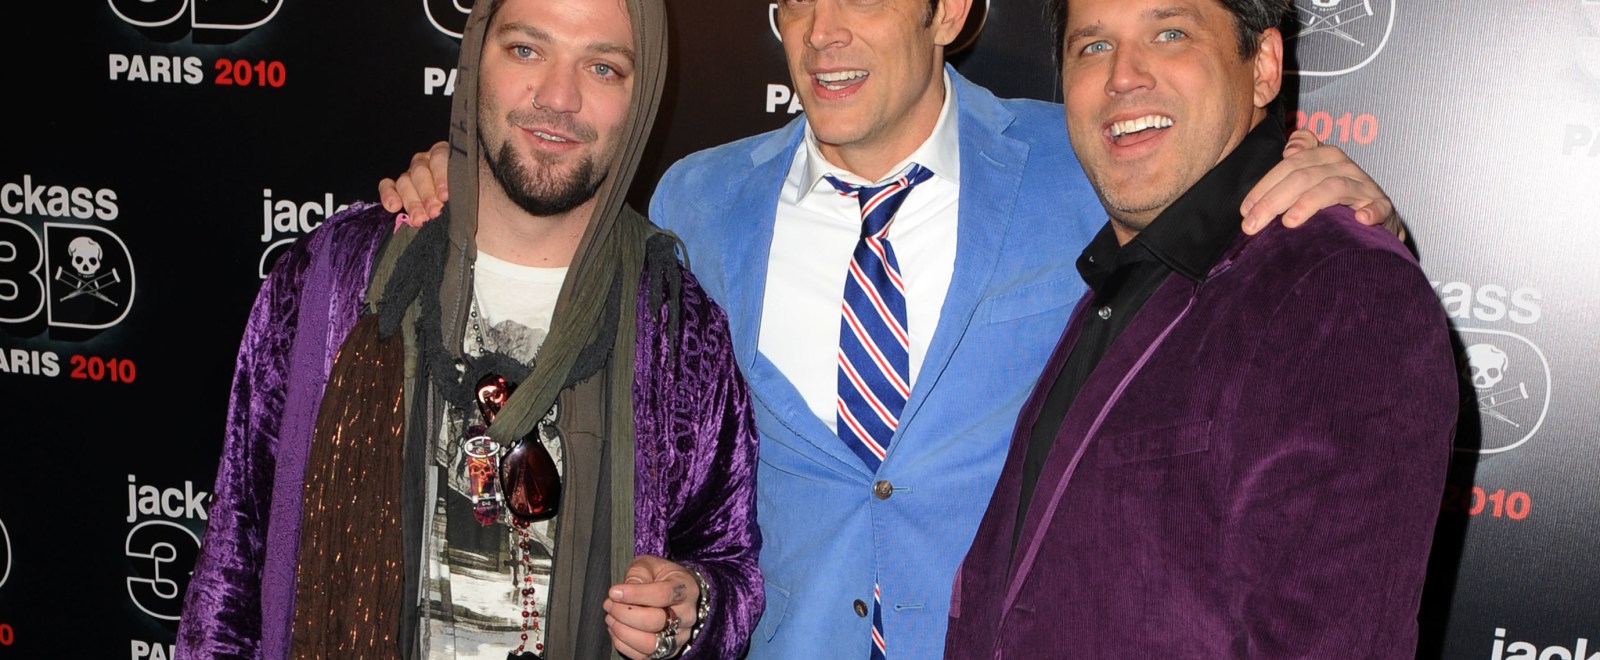 Bam-Margera-Johnny-Knoxville-Jeff-Tremaine-GettyImages-535764598.jpg